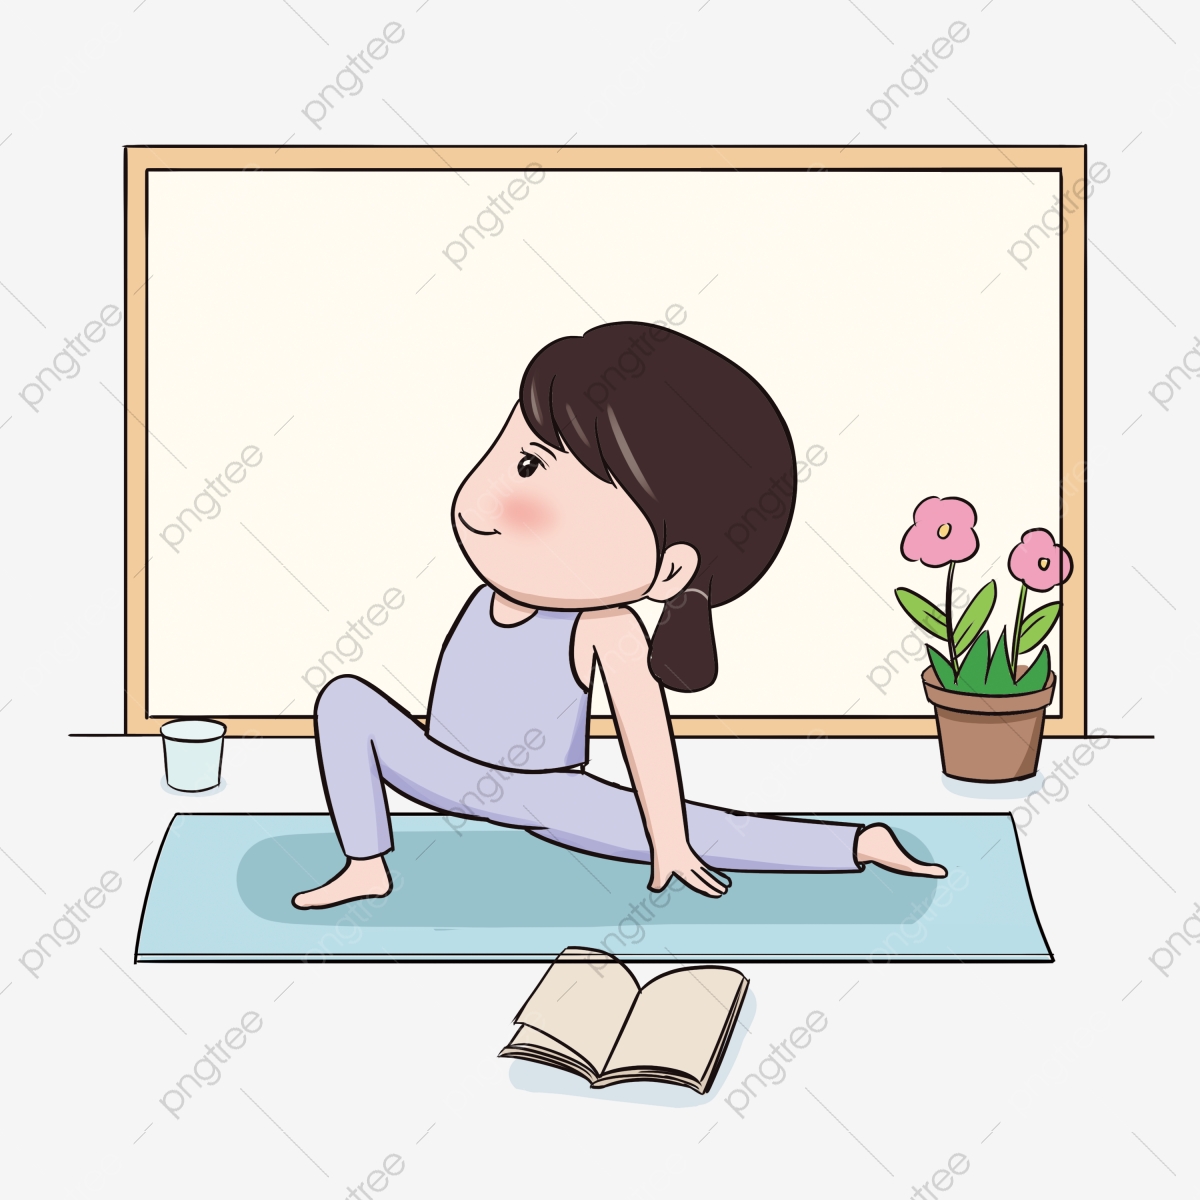 Movement clipart action. Fitness body posture stretch